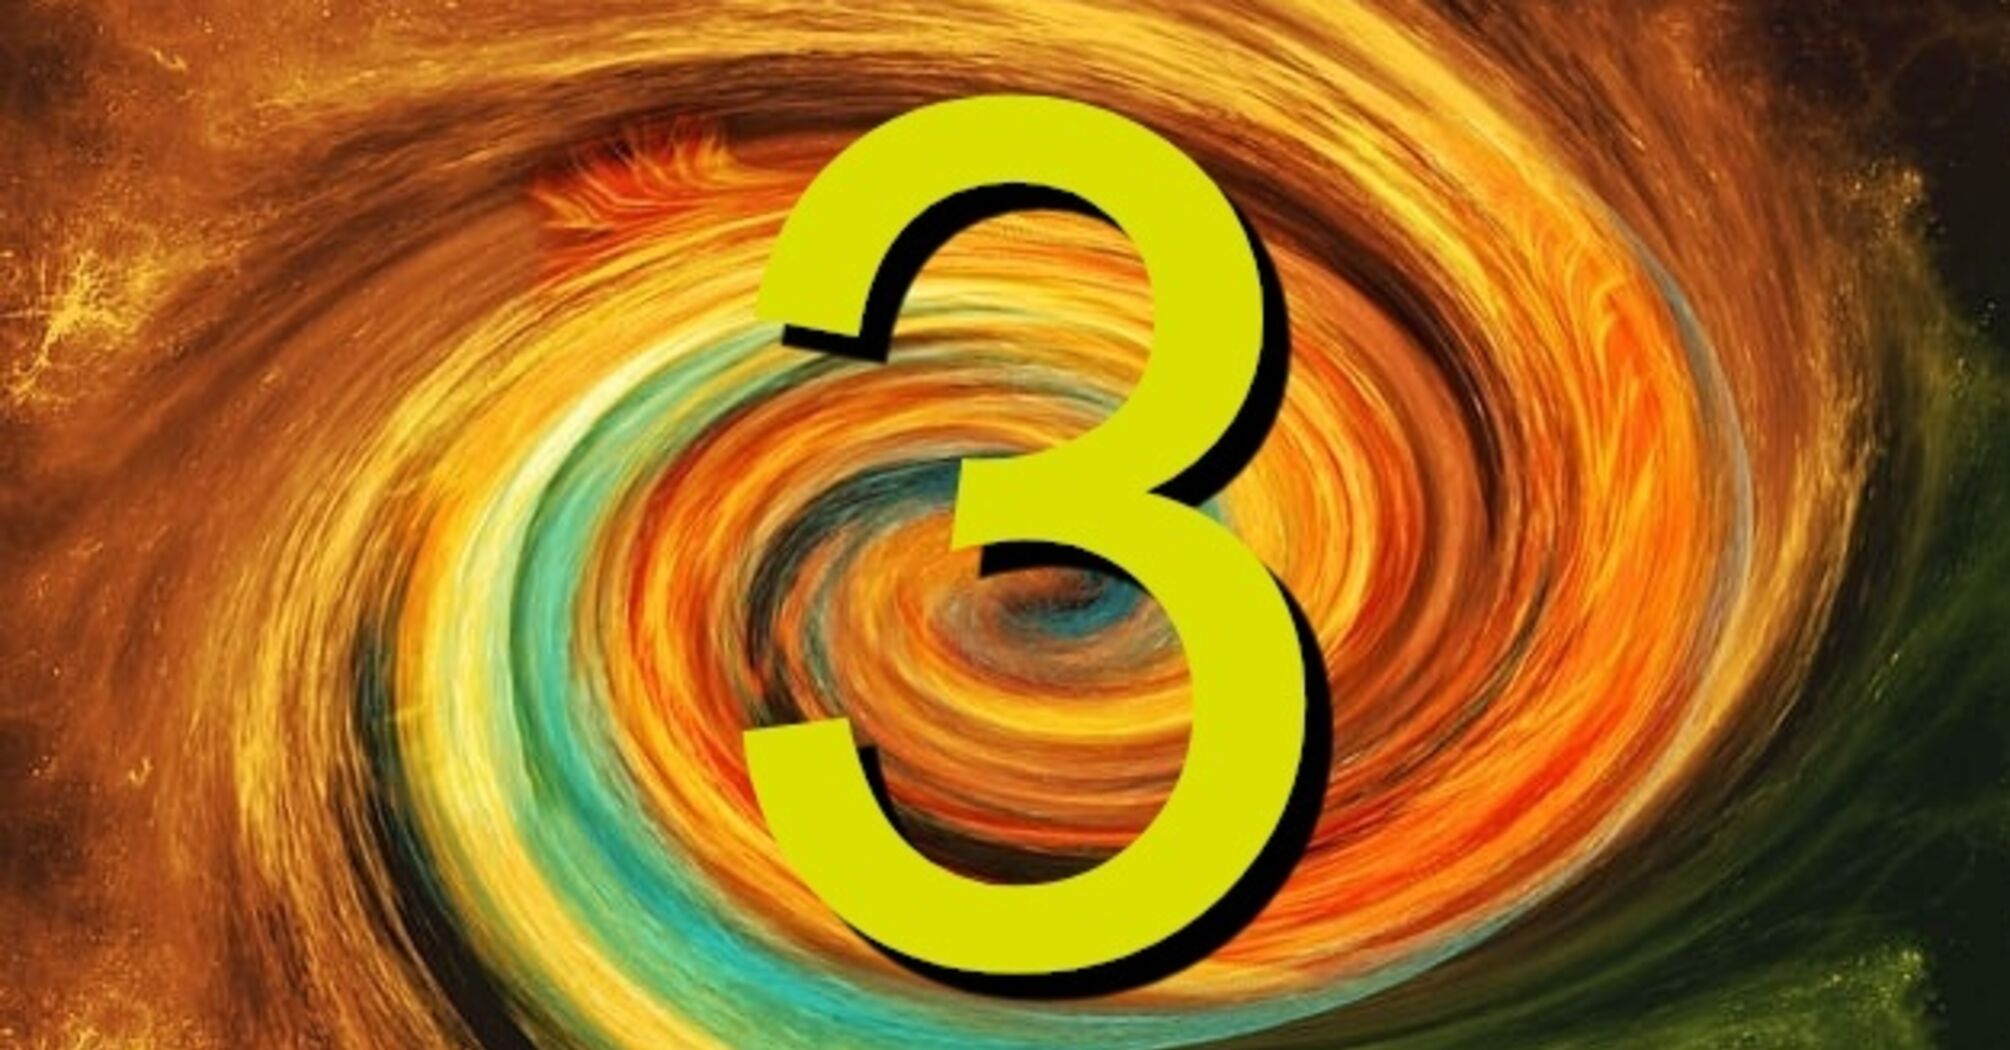 The number 3, meaning